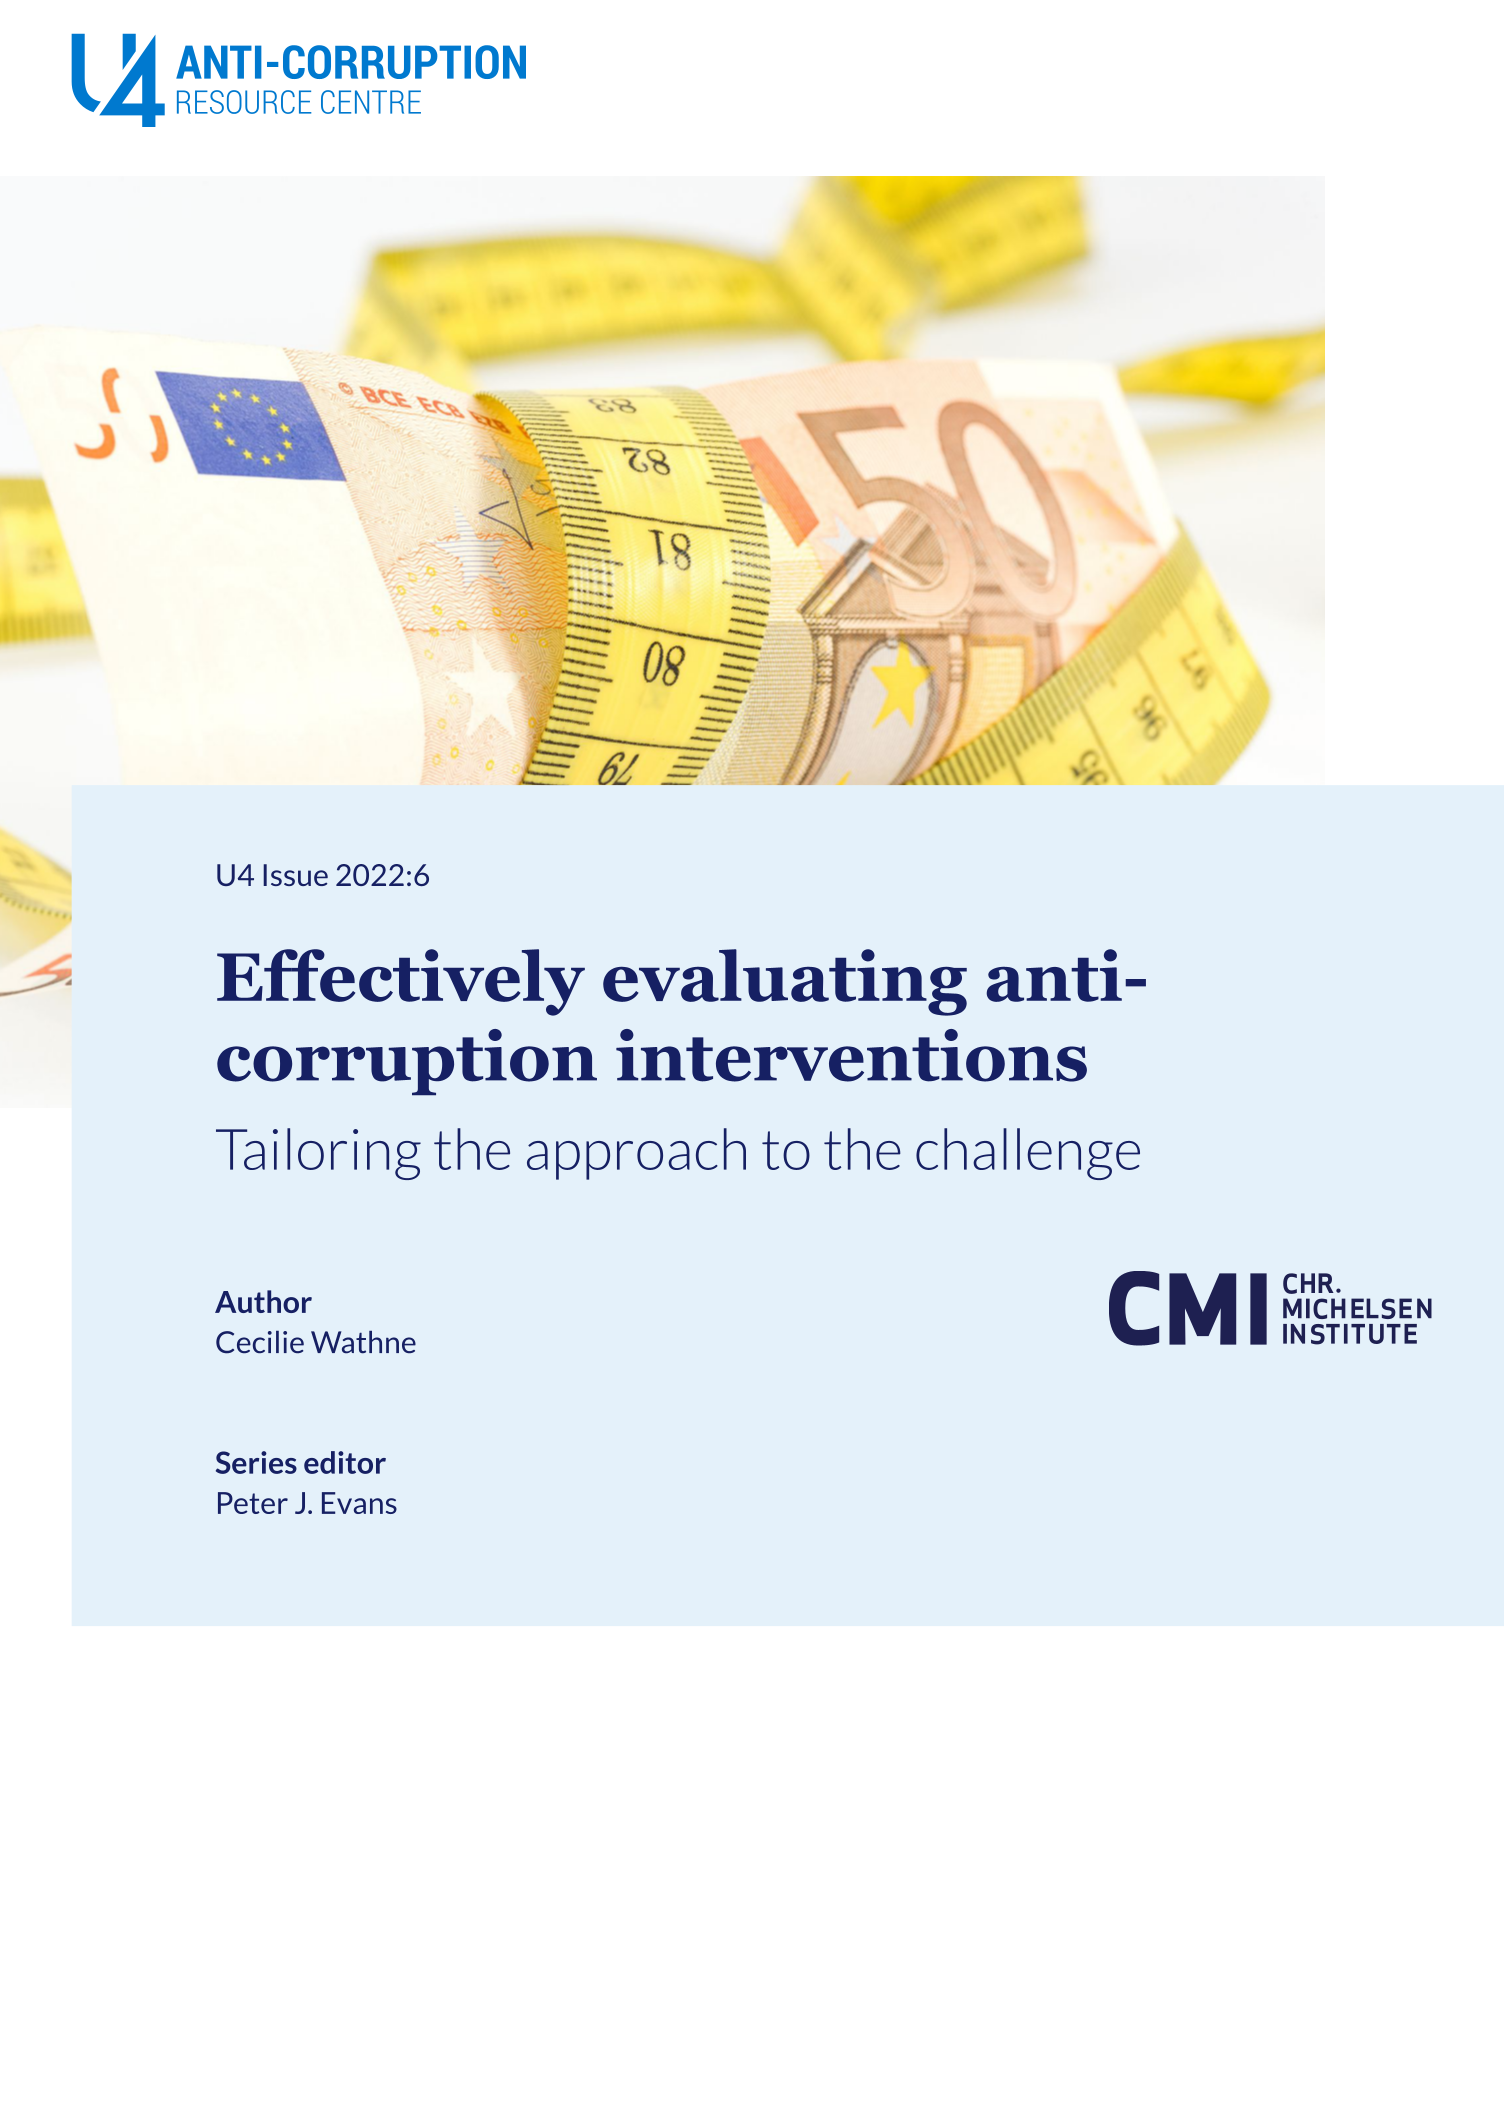 Effectively evaluating anti-corruption interventions